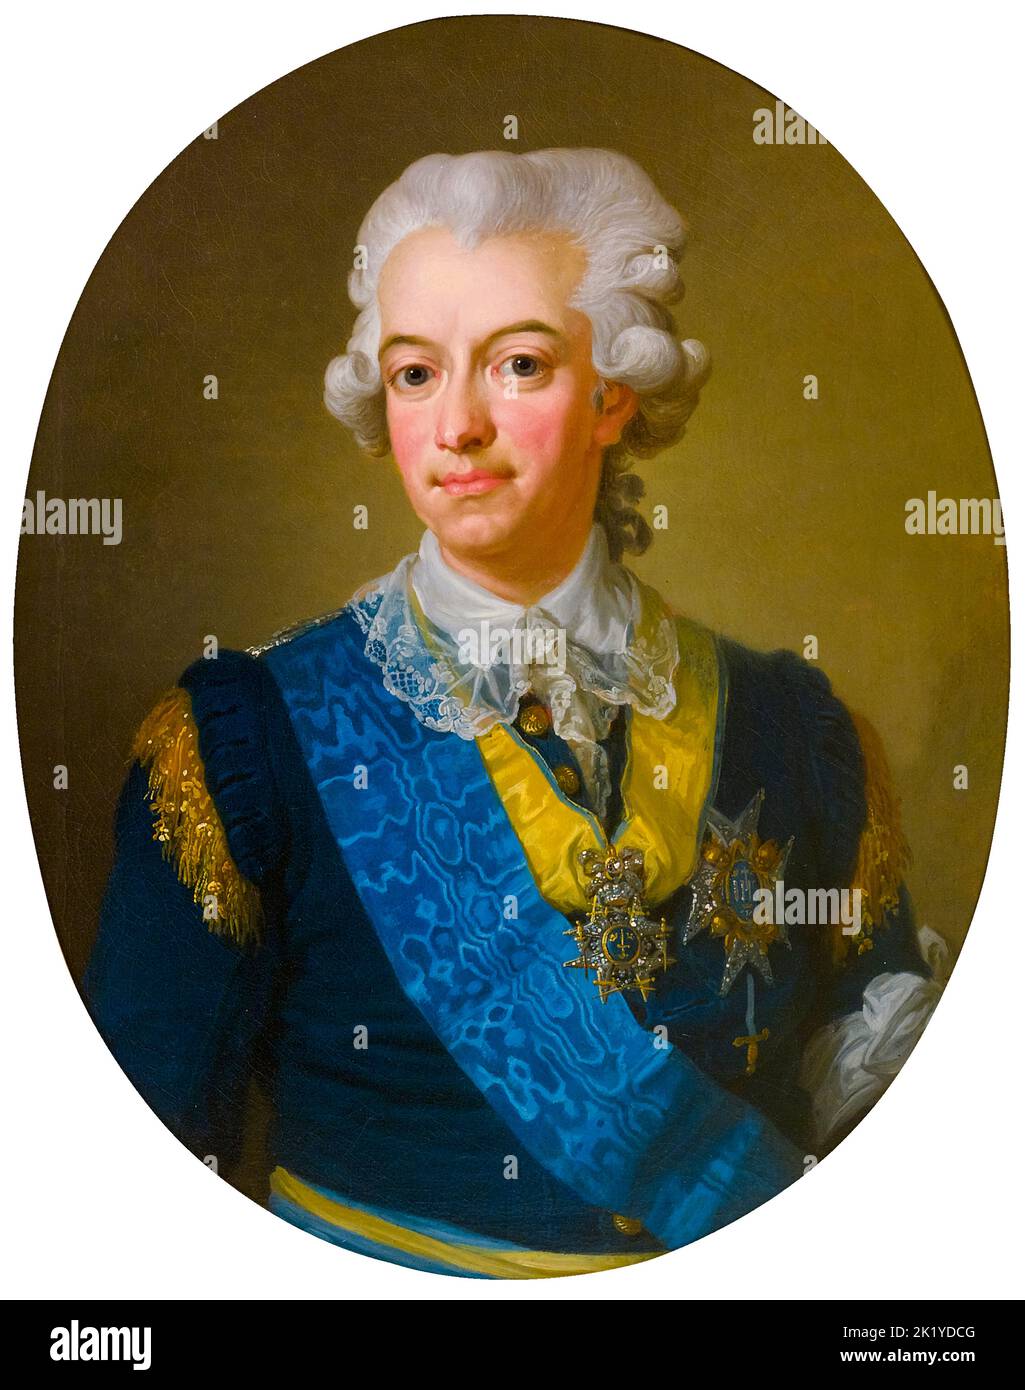 King Gustav III of Sweden (1746-1792), portrait painting in oil by Lorens Pasch the Younger, before 1799 Stock Photo